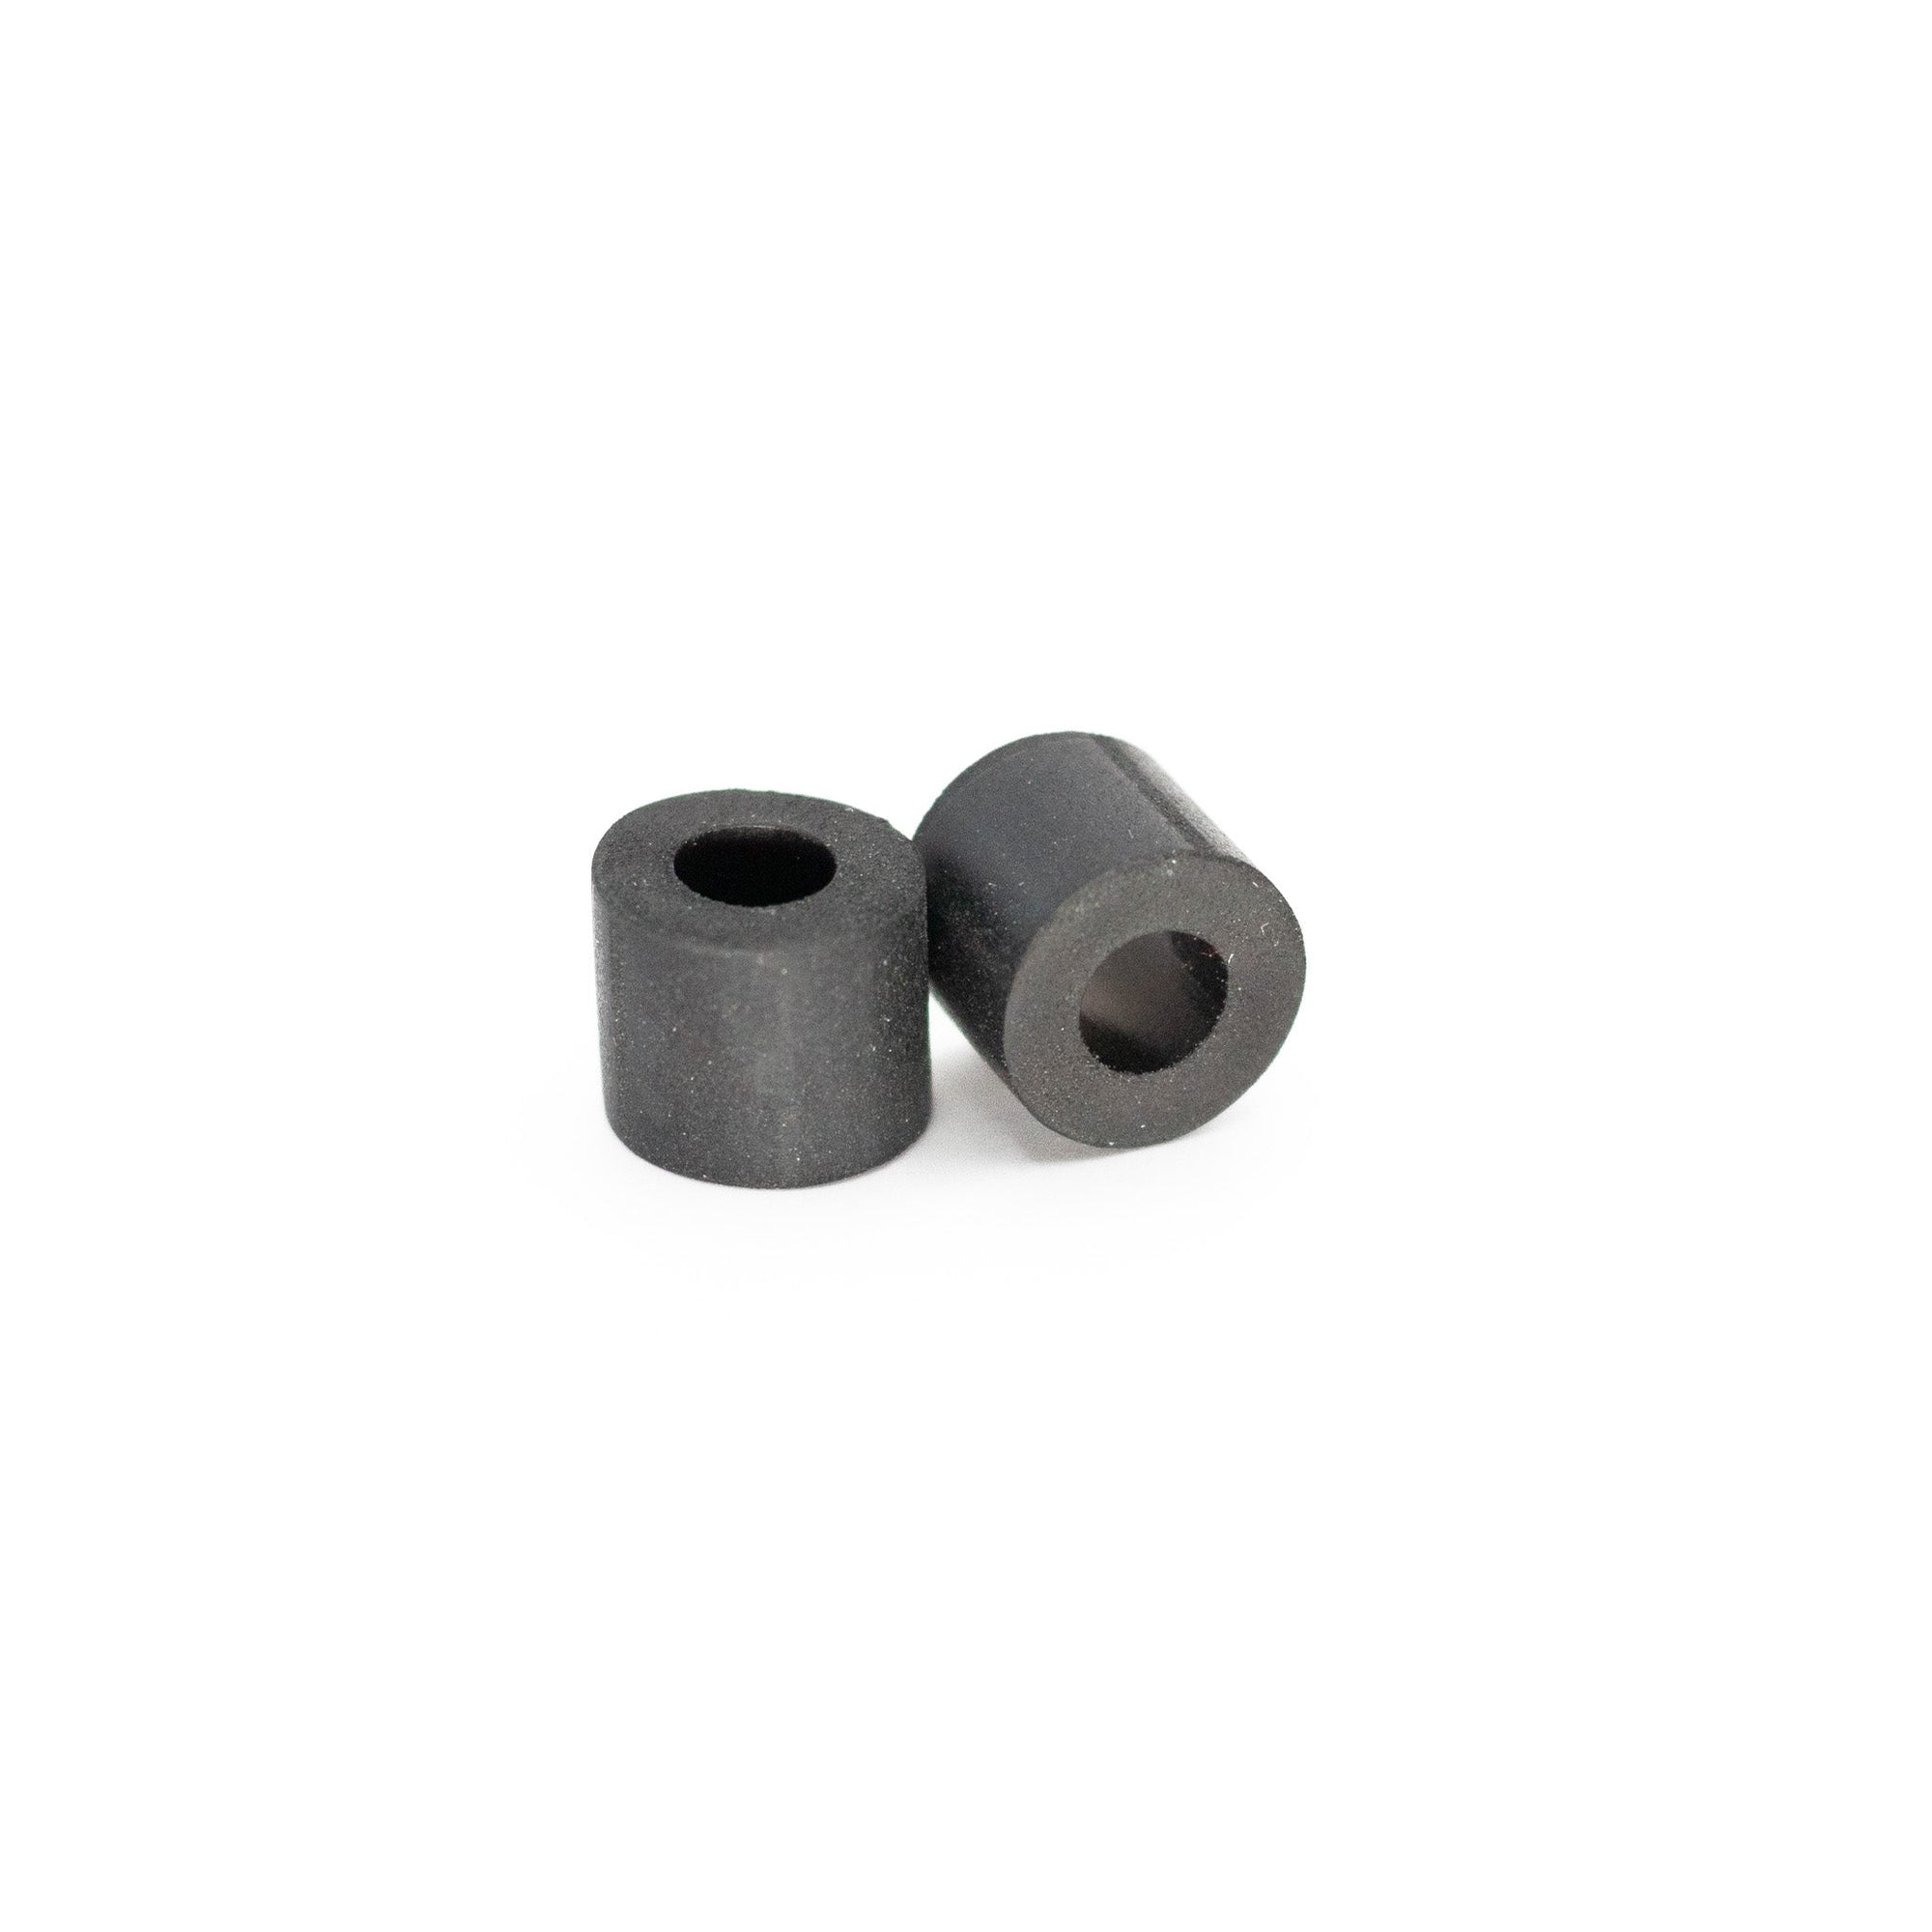 1/2" Rubber Spacer